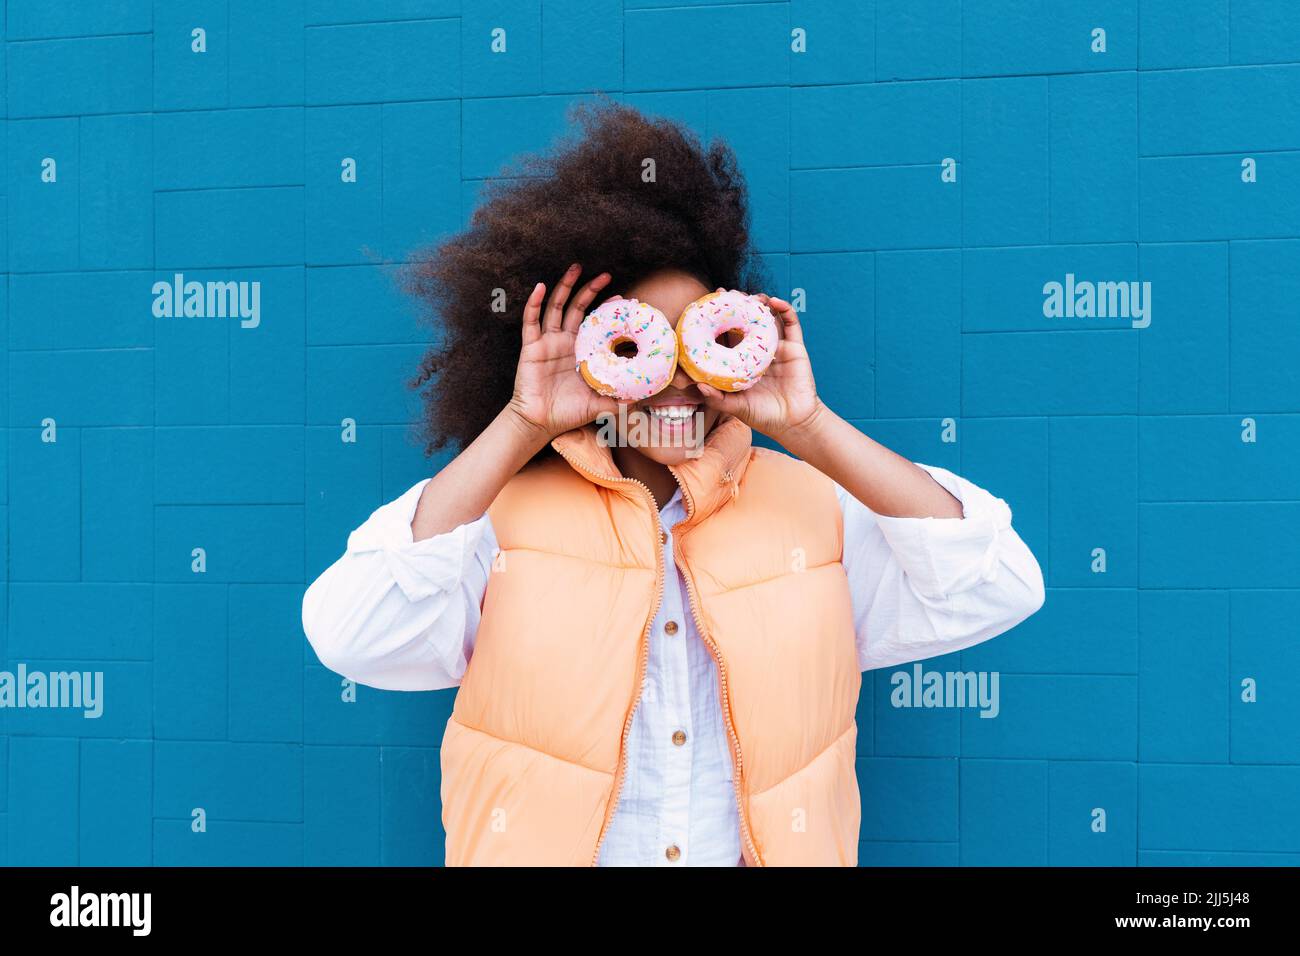 Happy girl covering eyes with doughnuts standing in front of blue wall Stock Photo